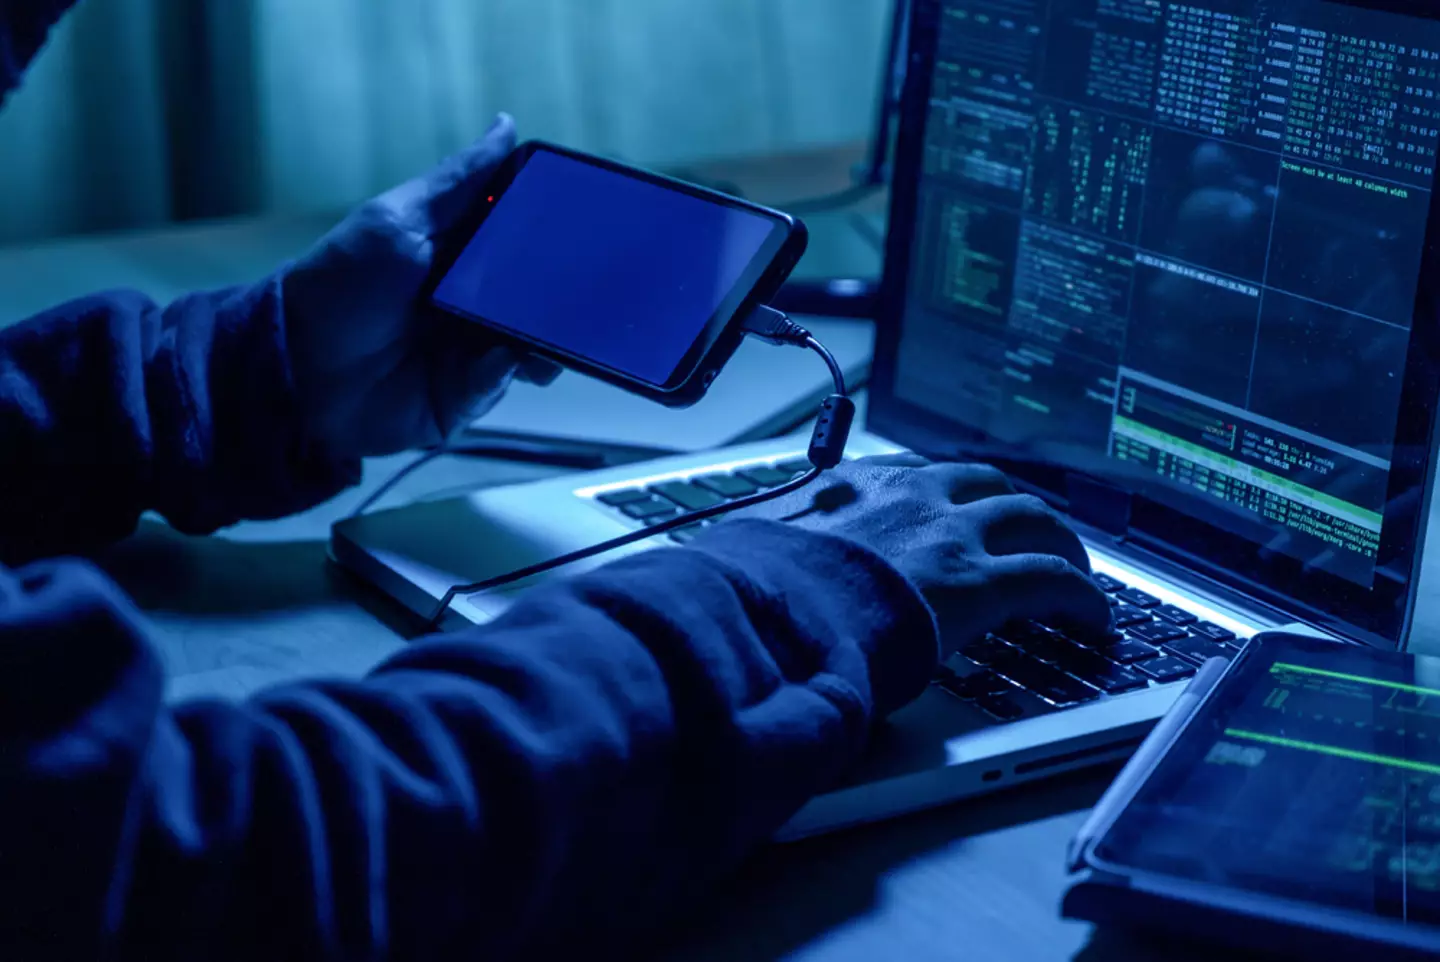 Your phone may be an easy target for hackers.